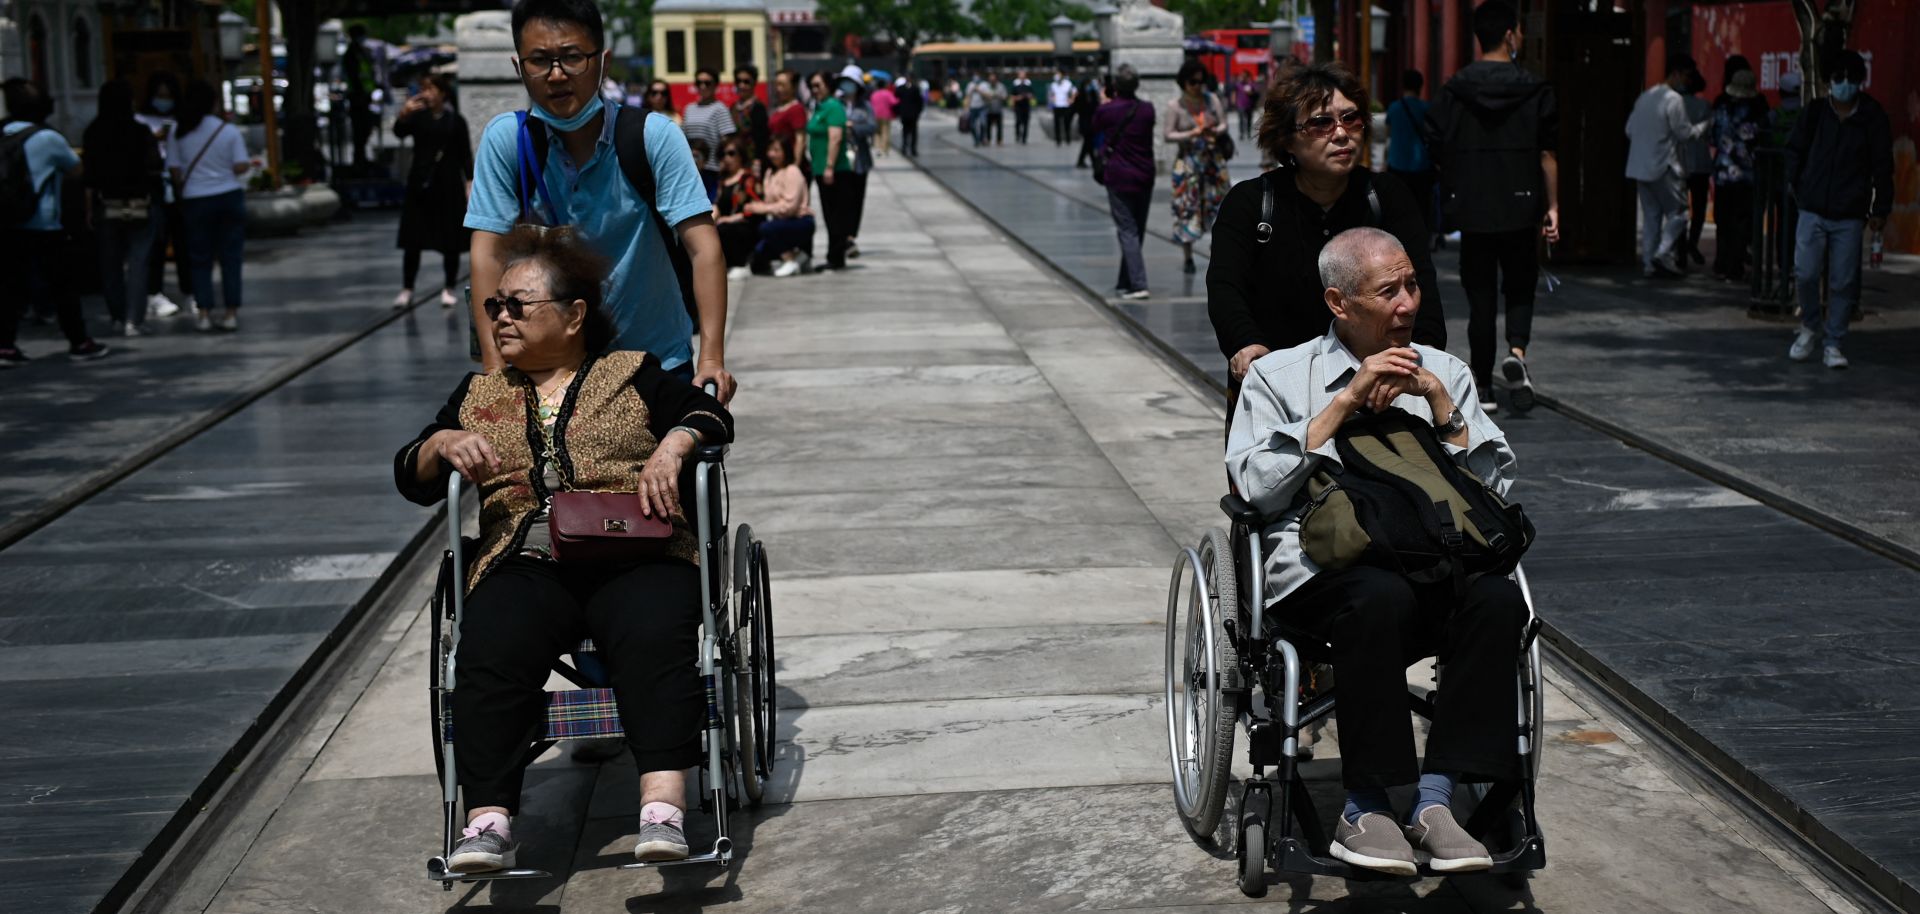 An elderly man and woman are pushed in wheelchairs along a street in Beijing, China, on May 11, 2021.